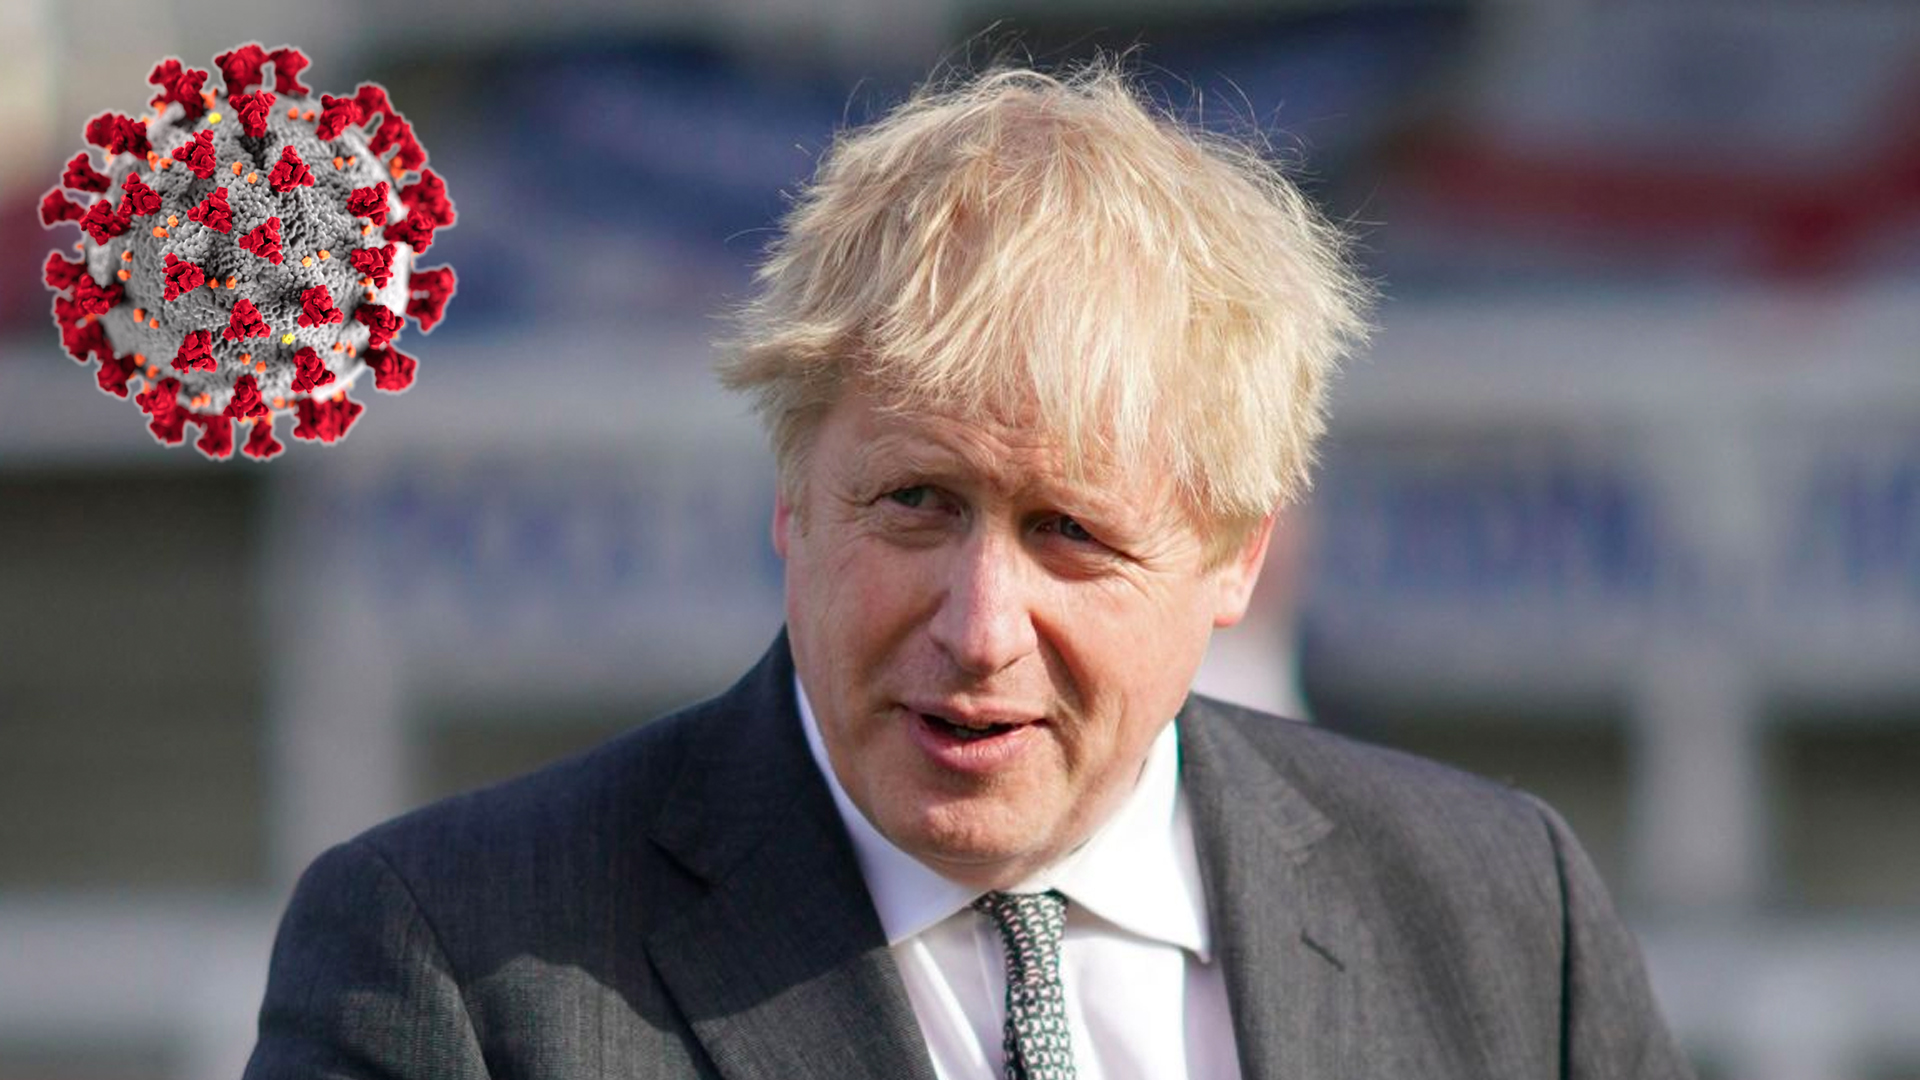 Boris Johnson says social distancing rules could be removed next month